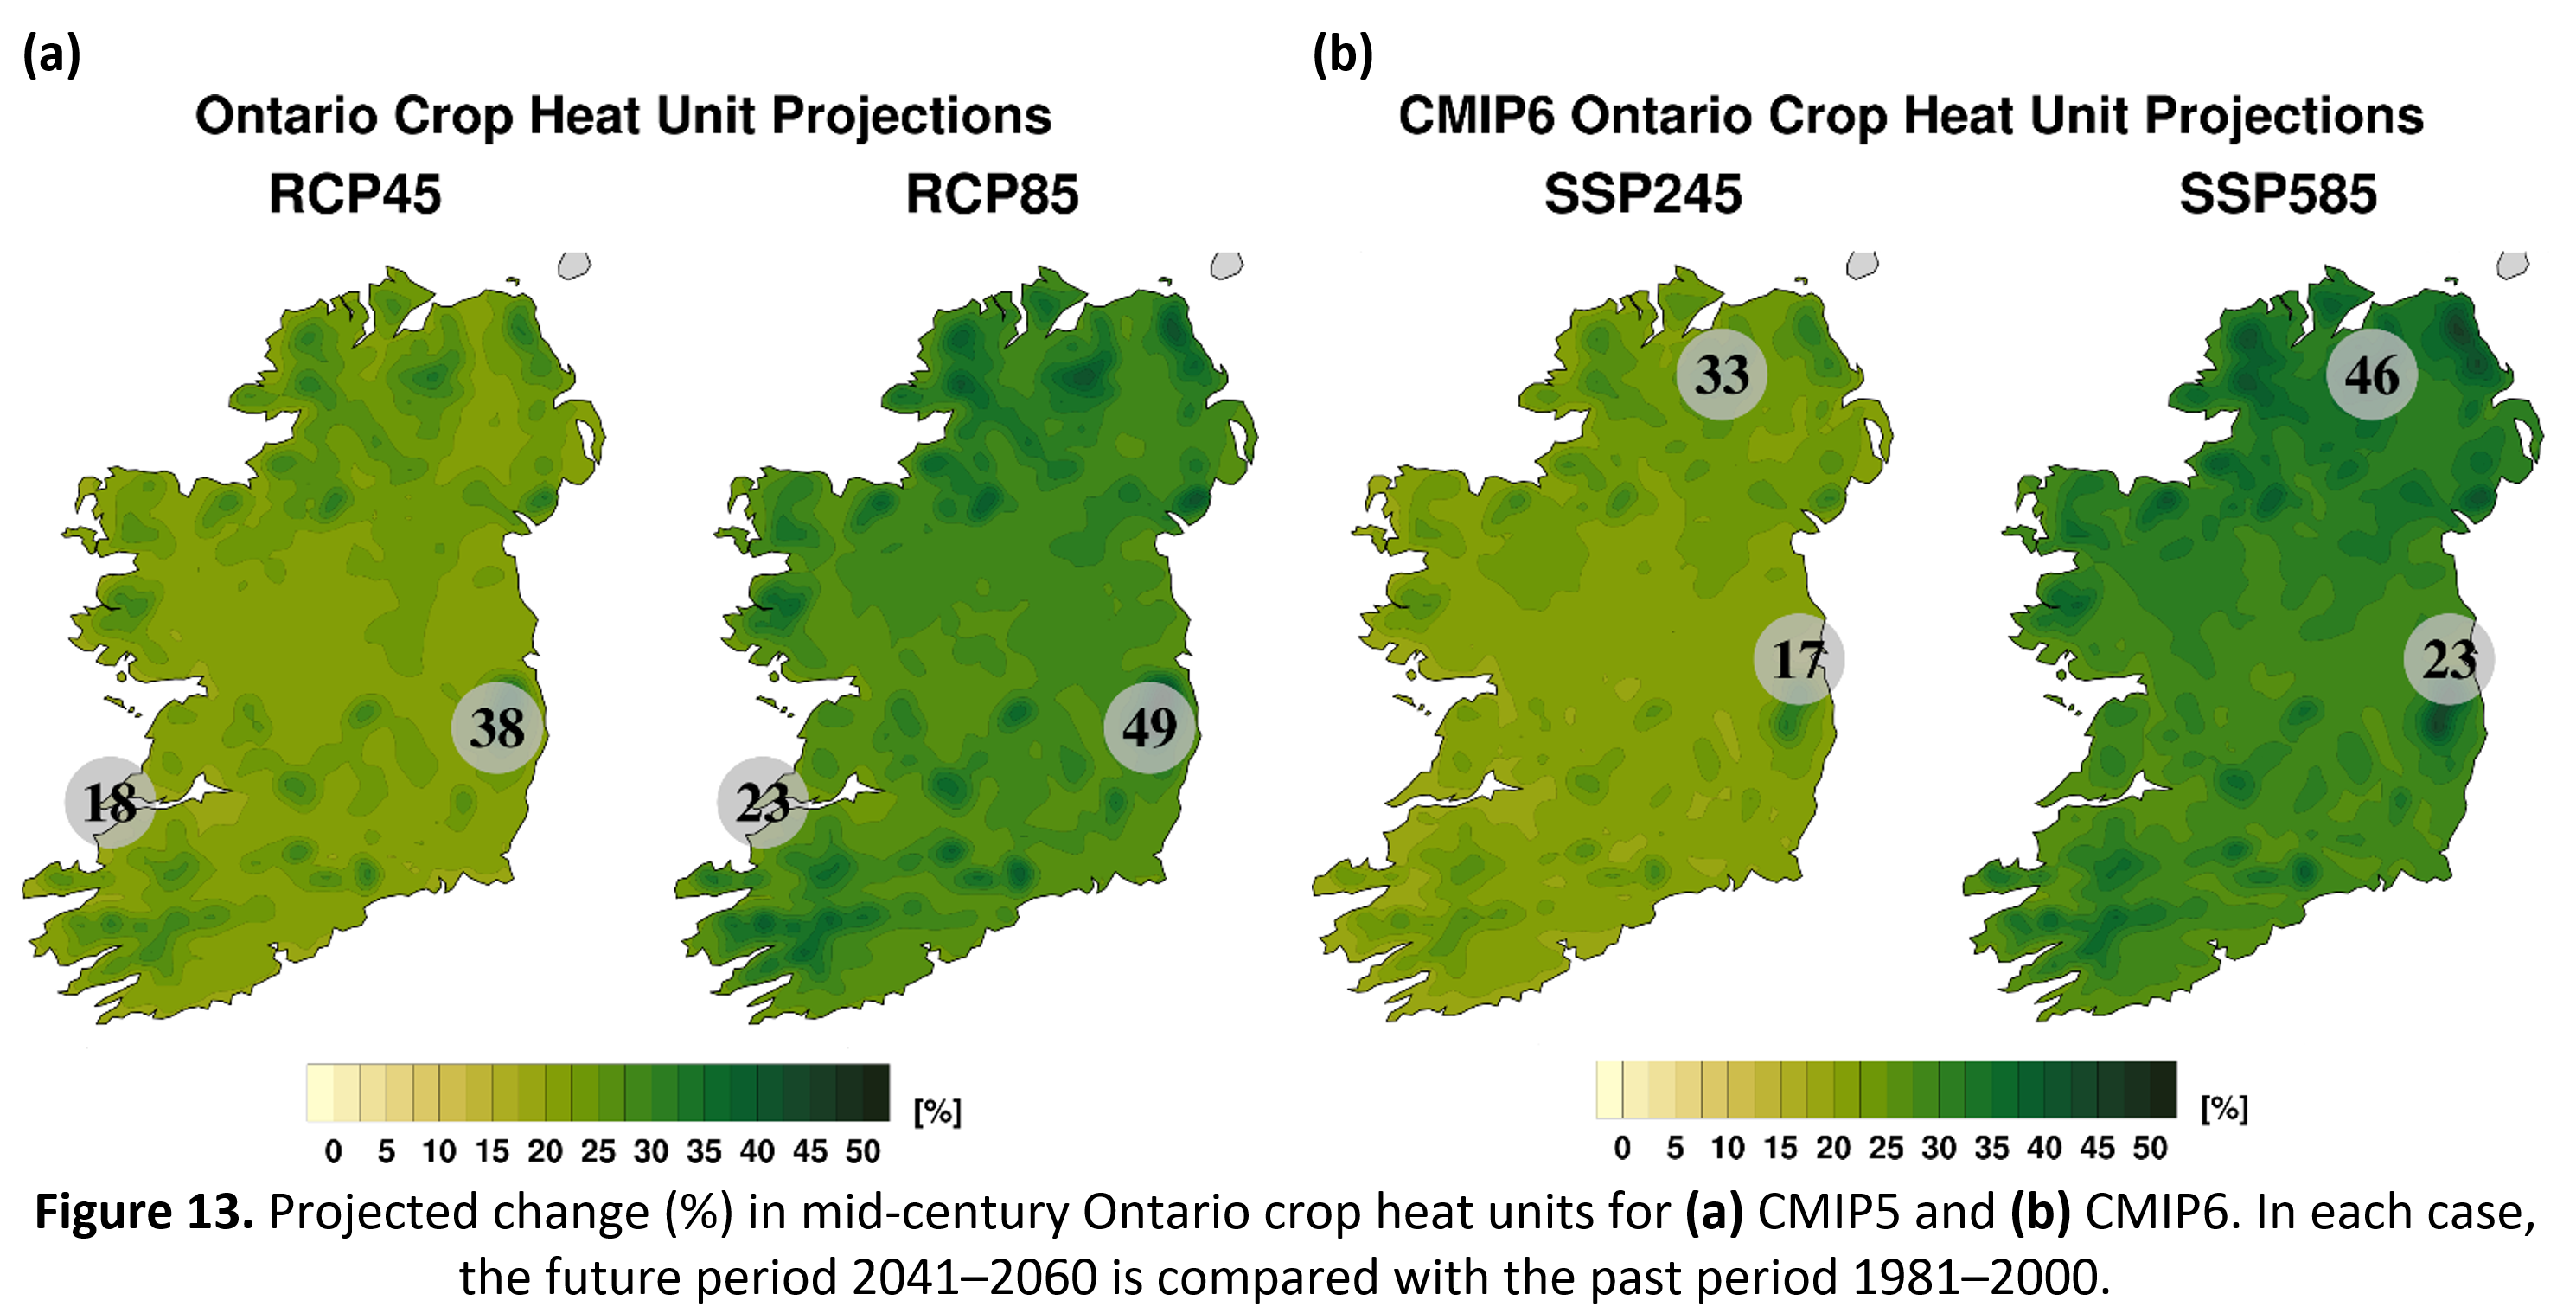 Figure 13. Projected change (%) in mid-century Ontario crop heat units for (a) CMIP5 and (b) CMIP6. In each case, the future period 2041–2060 is compared with the past period 1981–2000.